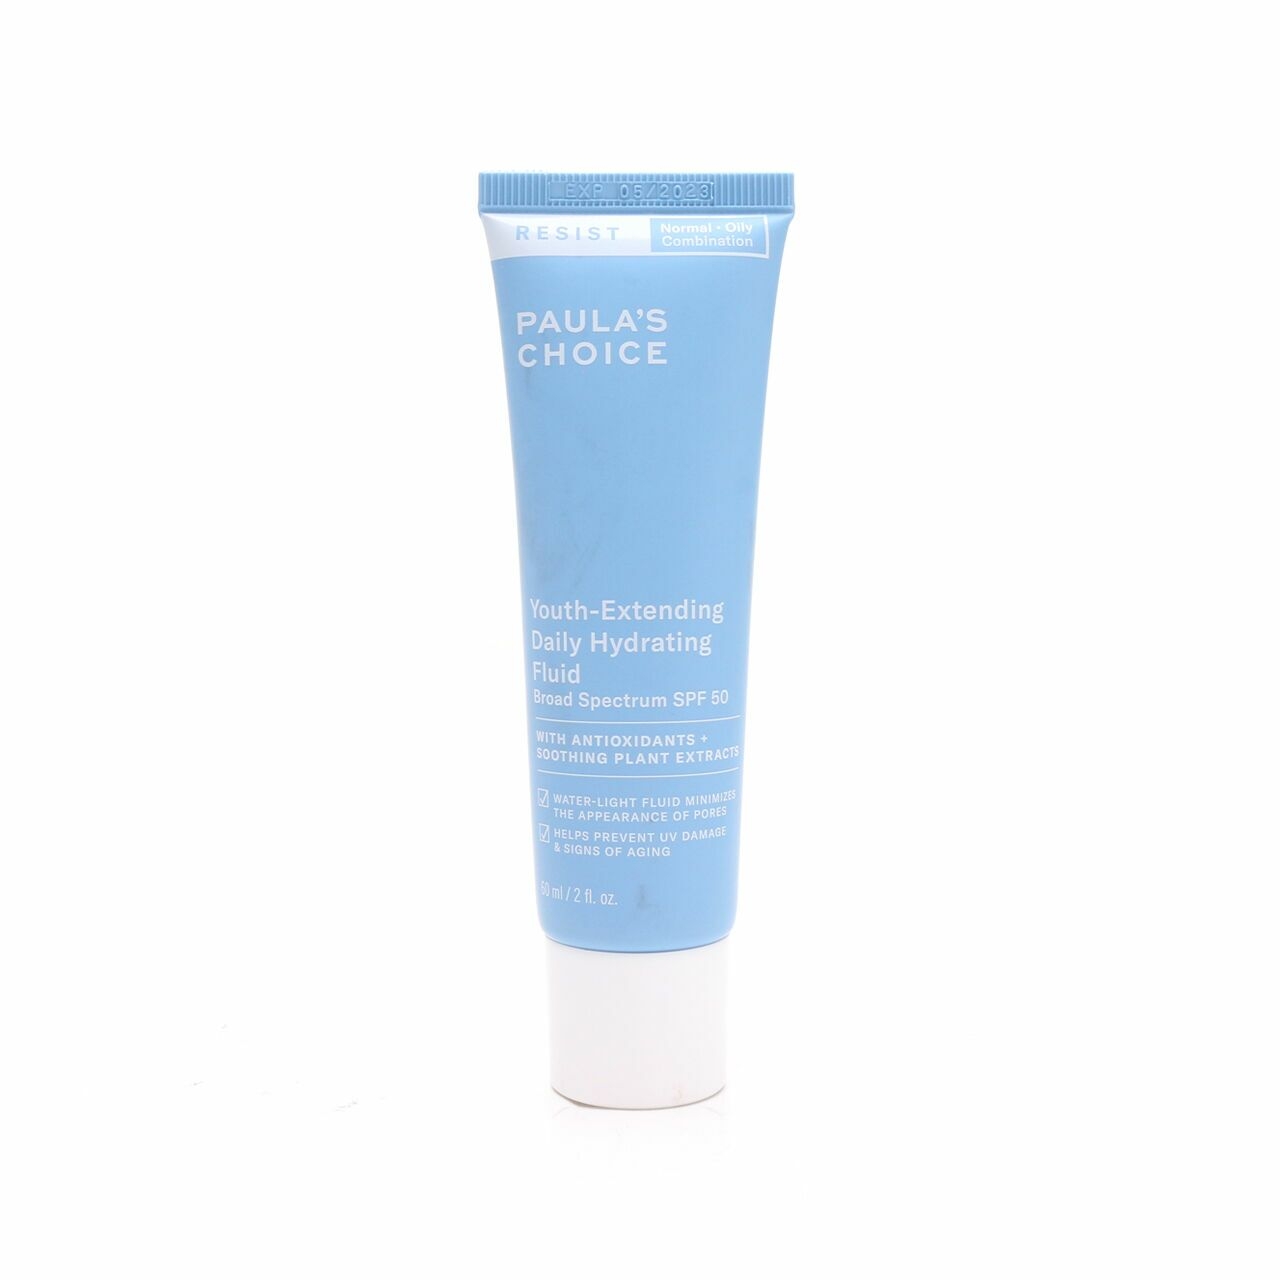 Paula's Choice Resist Youth Extending Daily Hydrating Fluid SPF 50 Skin Care